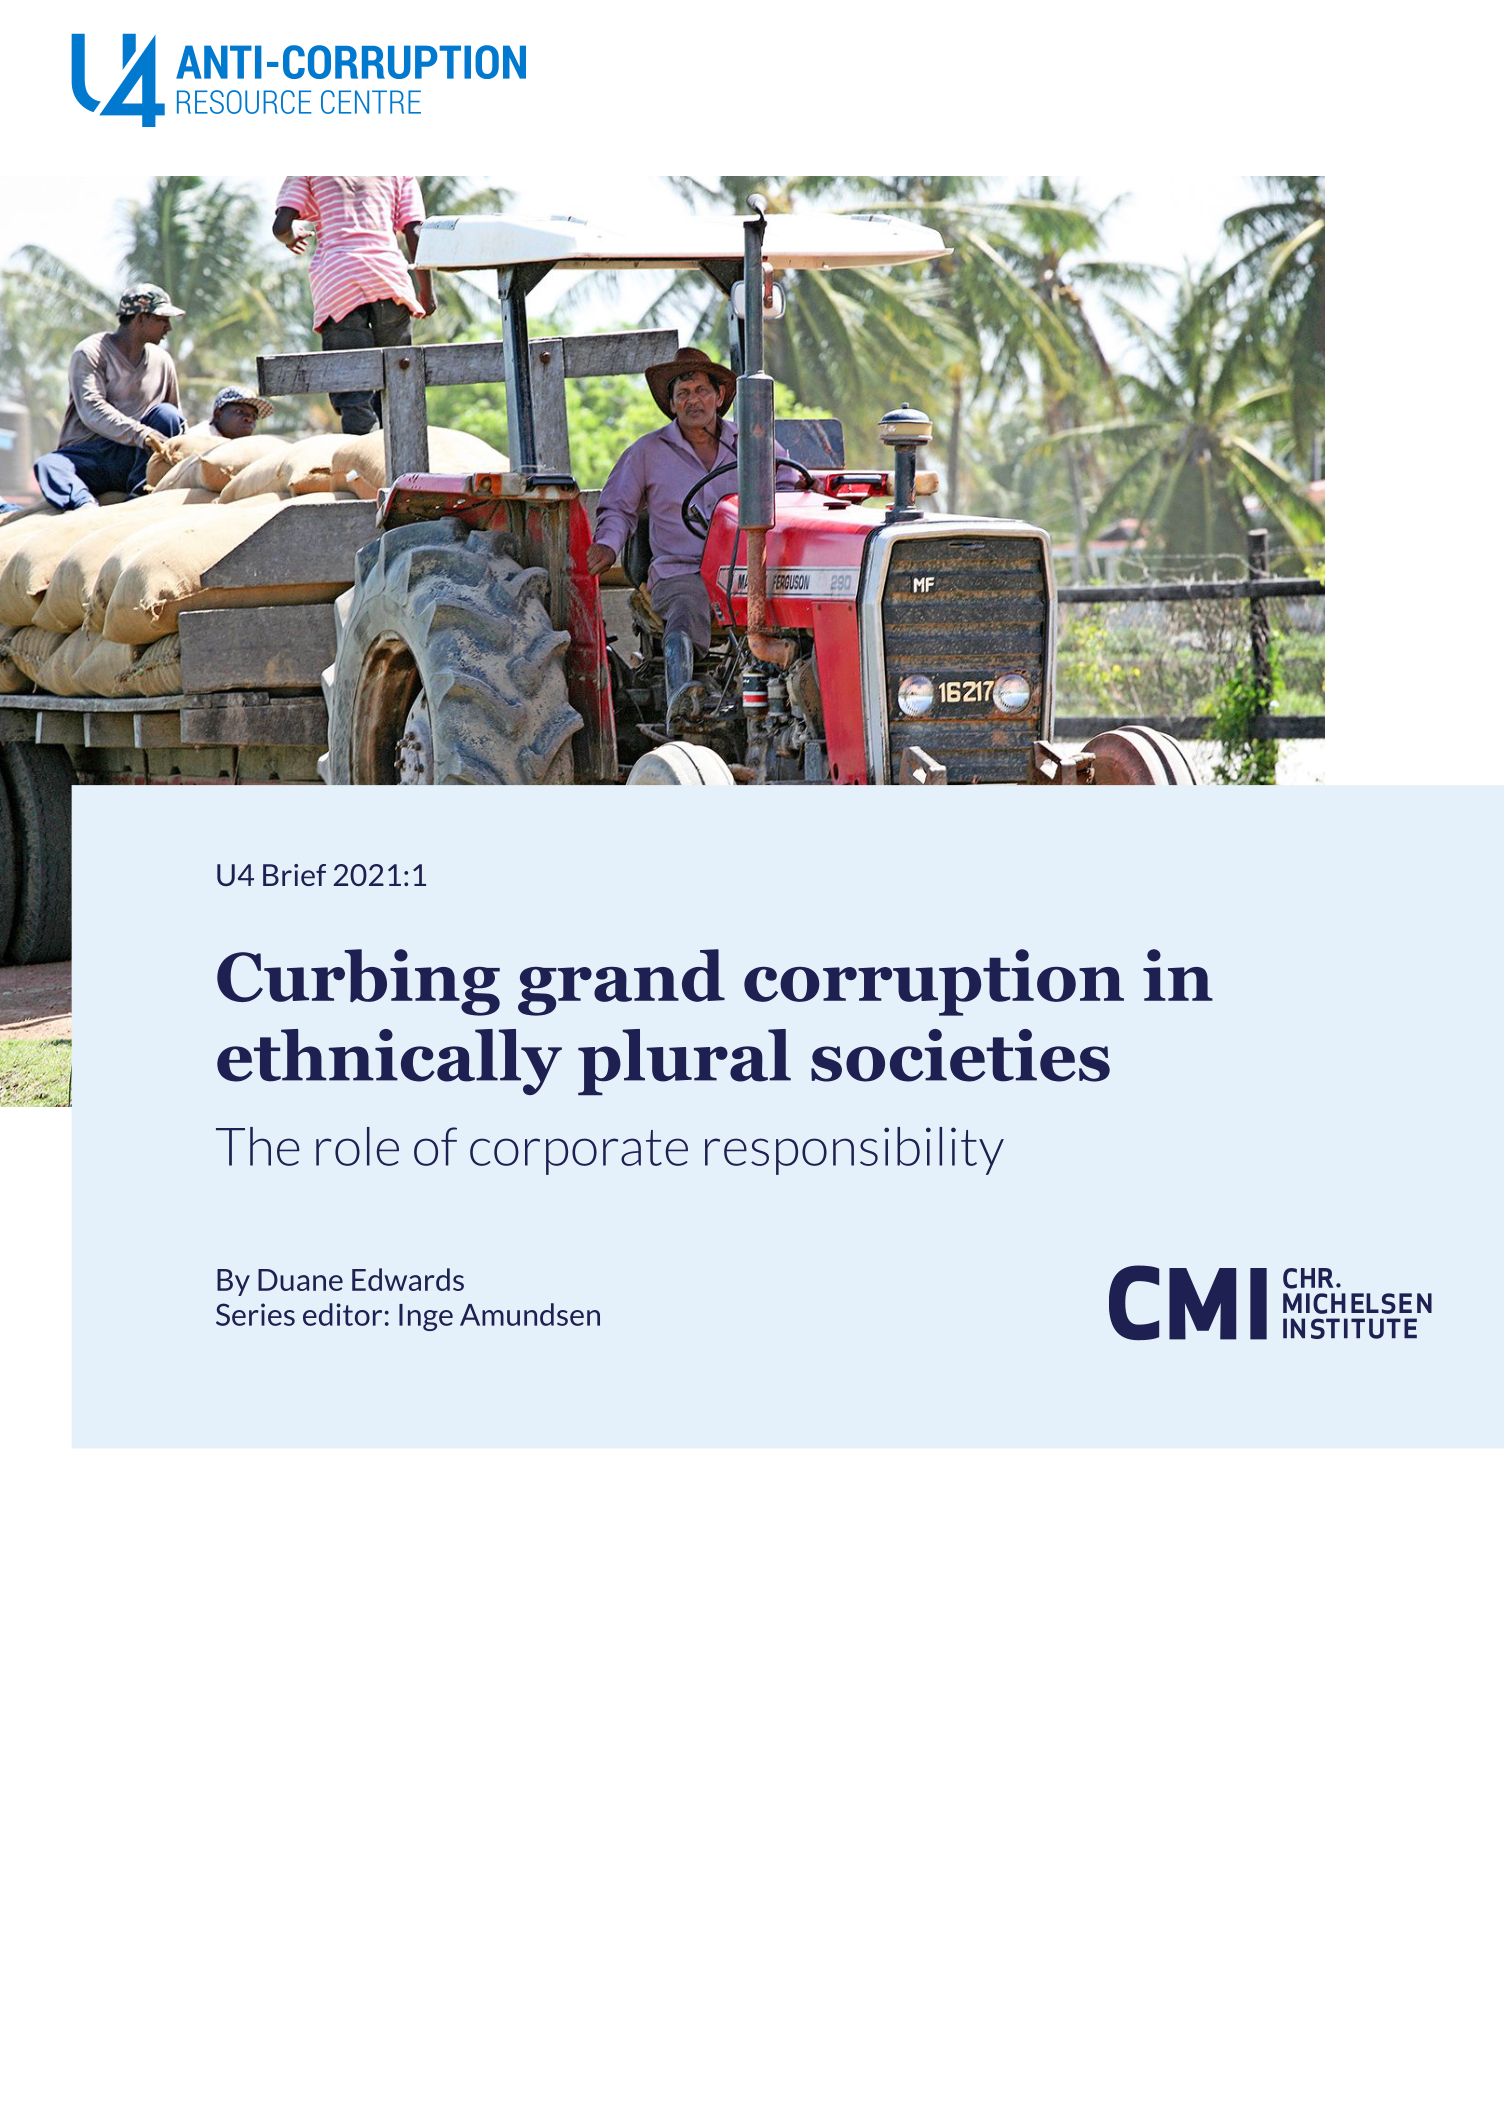 Curbing grand corruption in ethnically plural societies